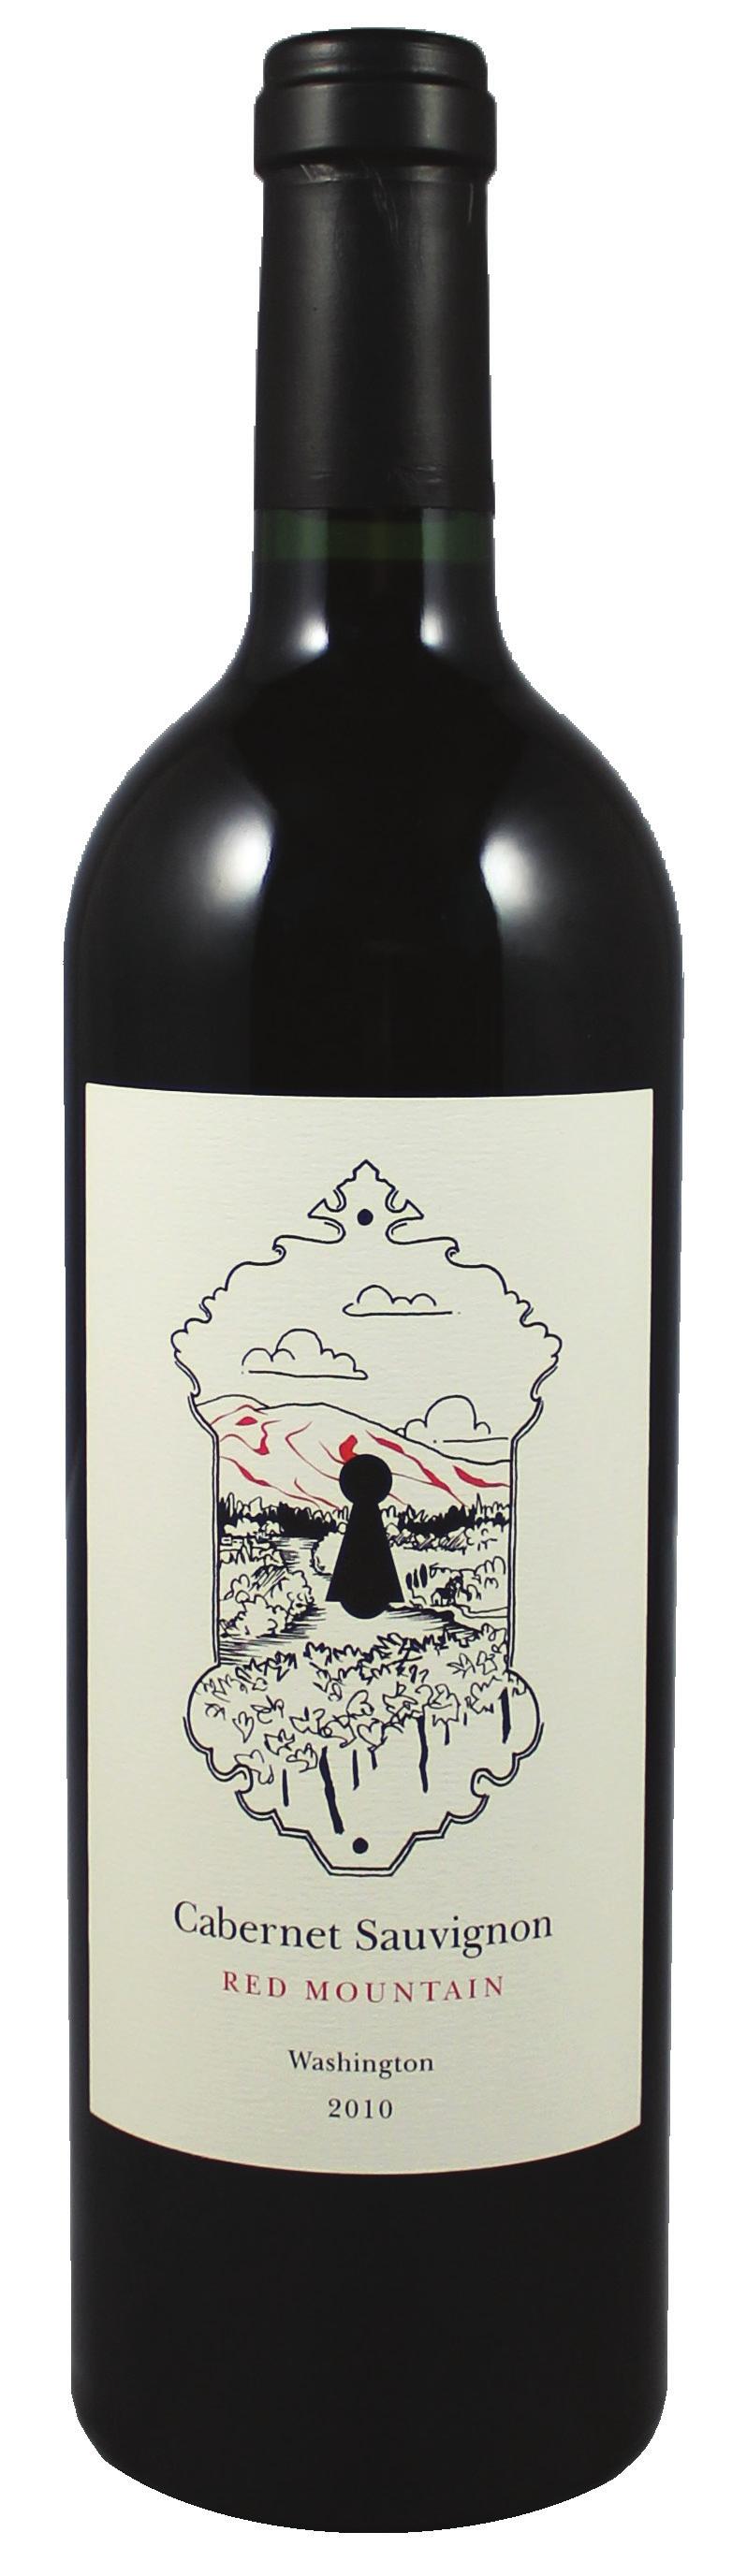 RED MOUNTAIN CABERNET SAUVIGNON WASHINGTON - 2010 82% Cabernet Sauvignon - 15% Merlot - 3% Cabernet Franc Red Mountain is a southwest-facing slope in south central Washington State, east of the